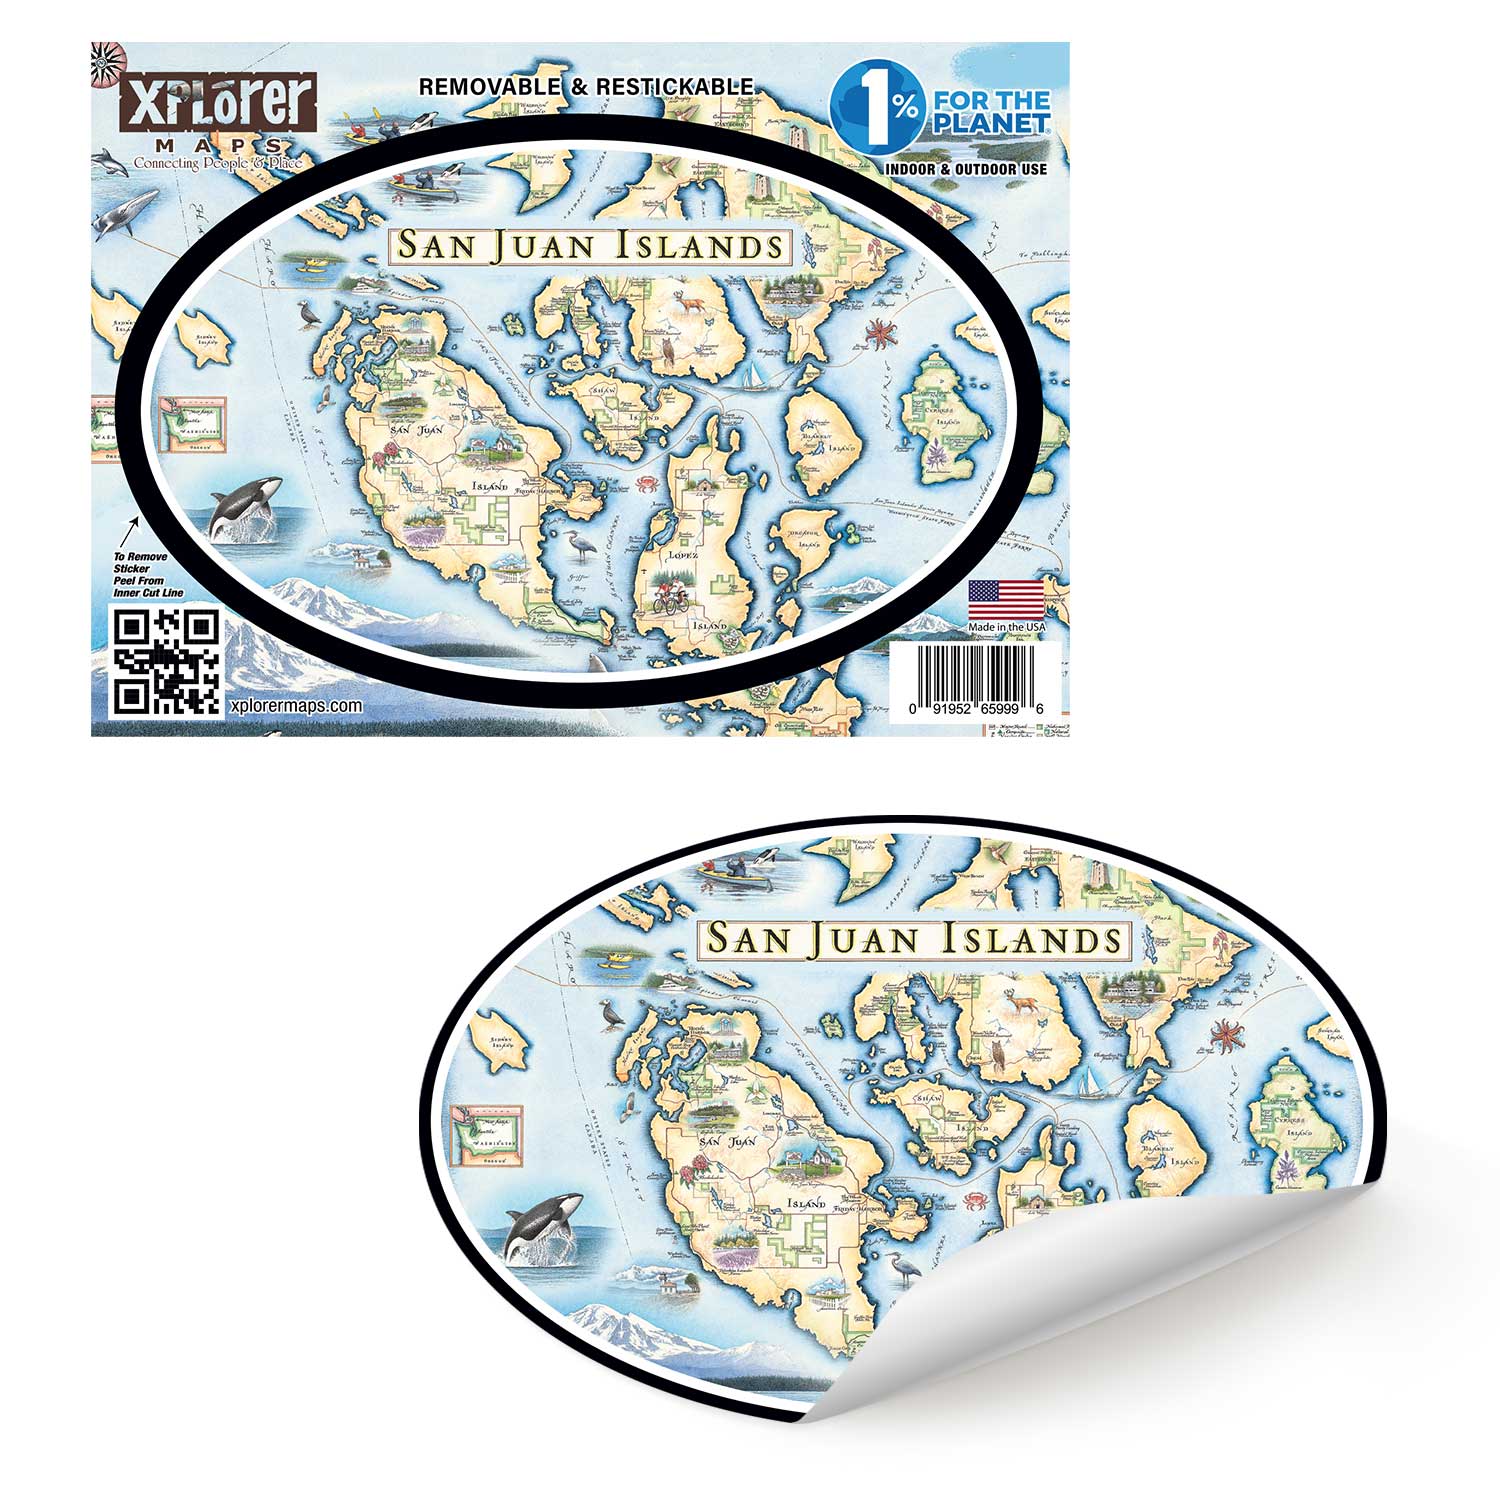 San Juan Islands Sticker by Xplorer Maps. The map features illustrations of places such as San Juan Vineyard, Turtleback Mountain Reserve, Liv Winery, and Roche Harbor. Flora and fauna include Orca Whale, Puffin, Herron, camas flower, and rhododendron.